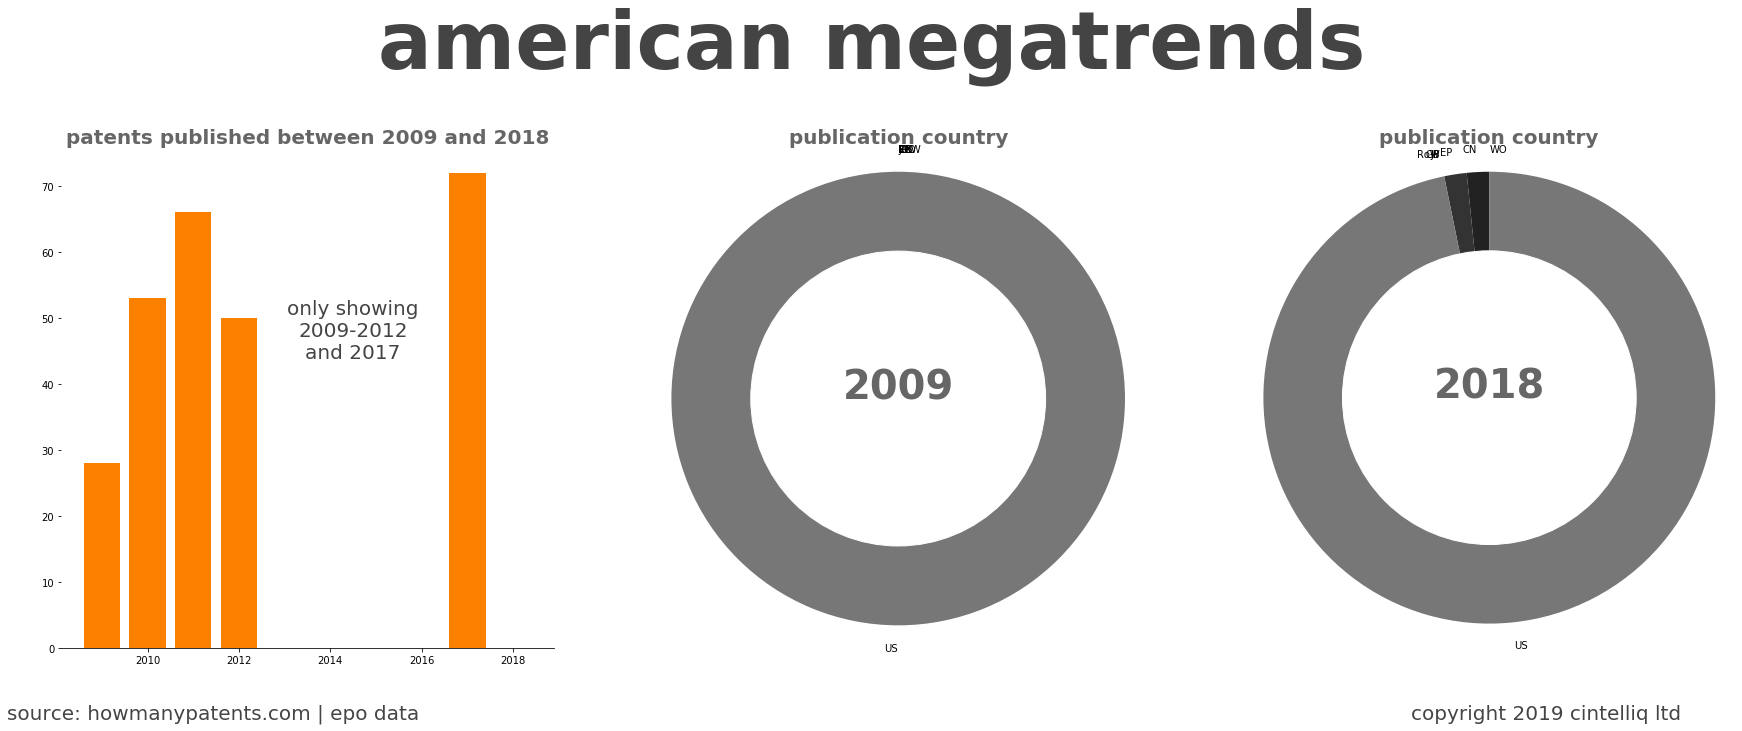 summary of patents for American Megatrends